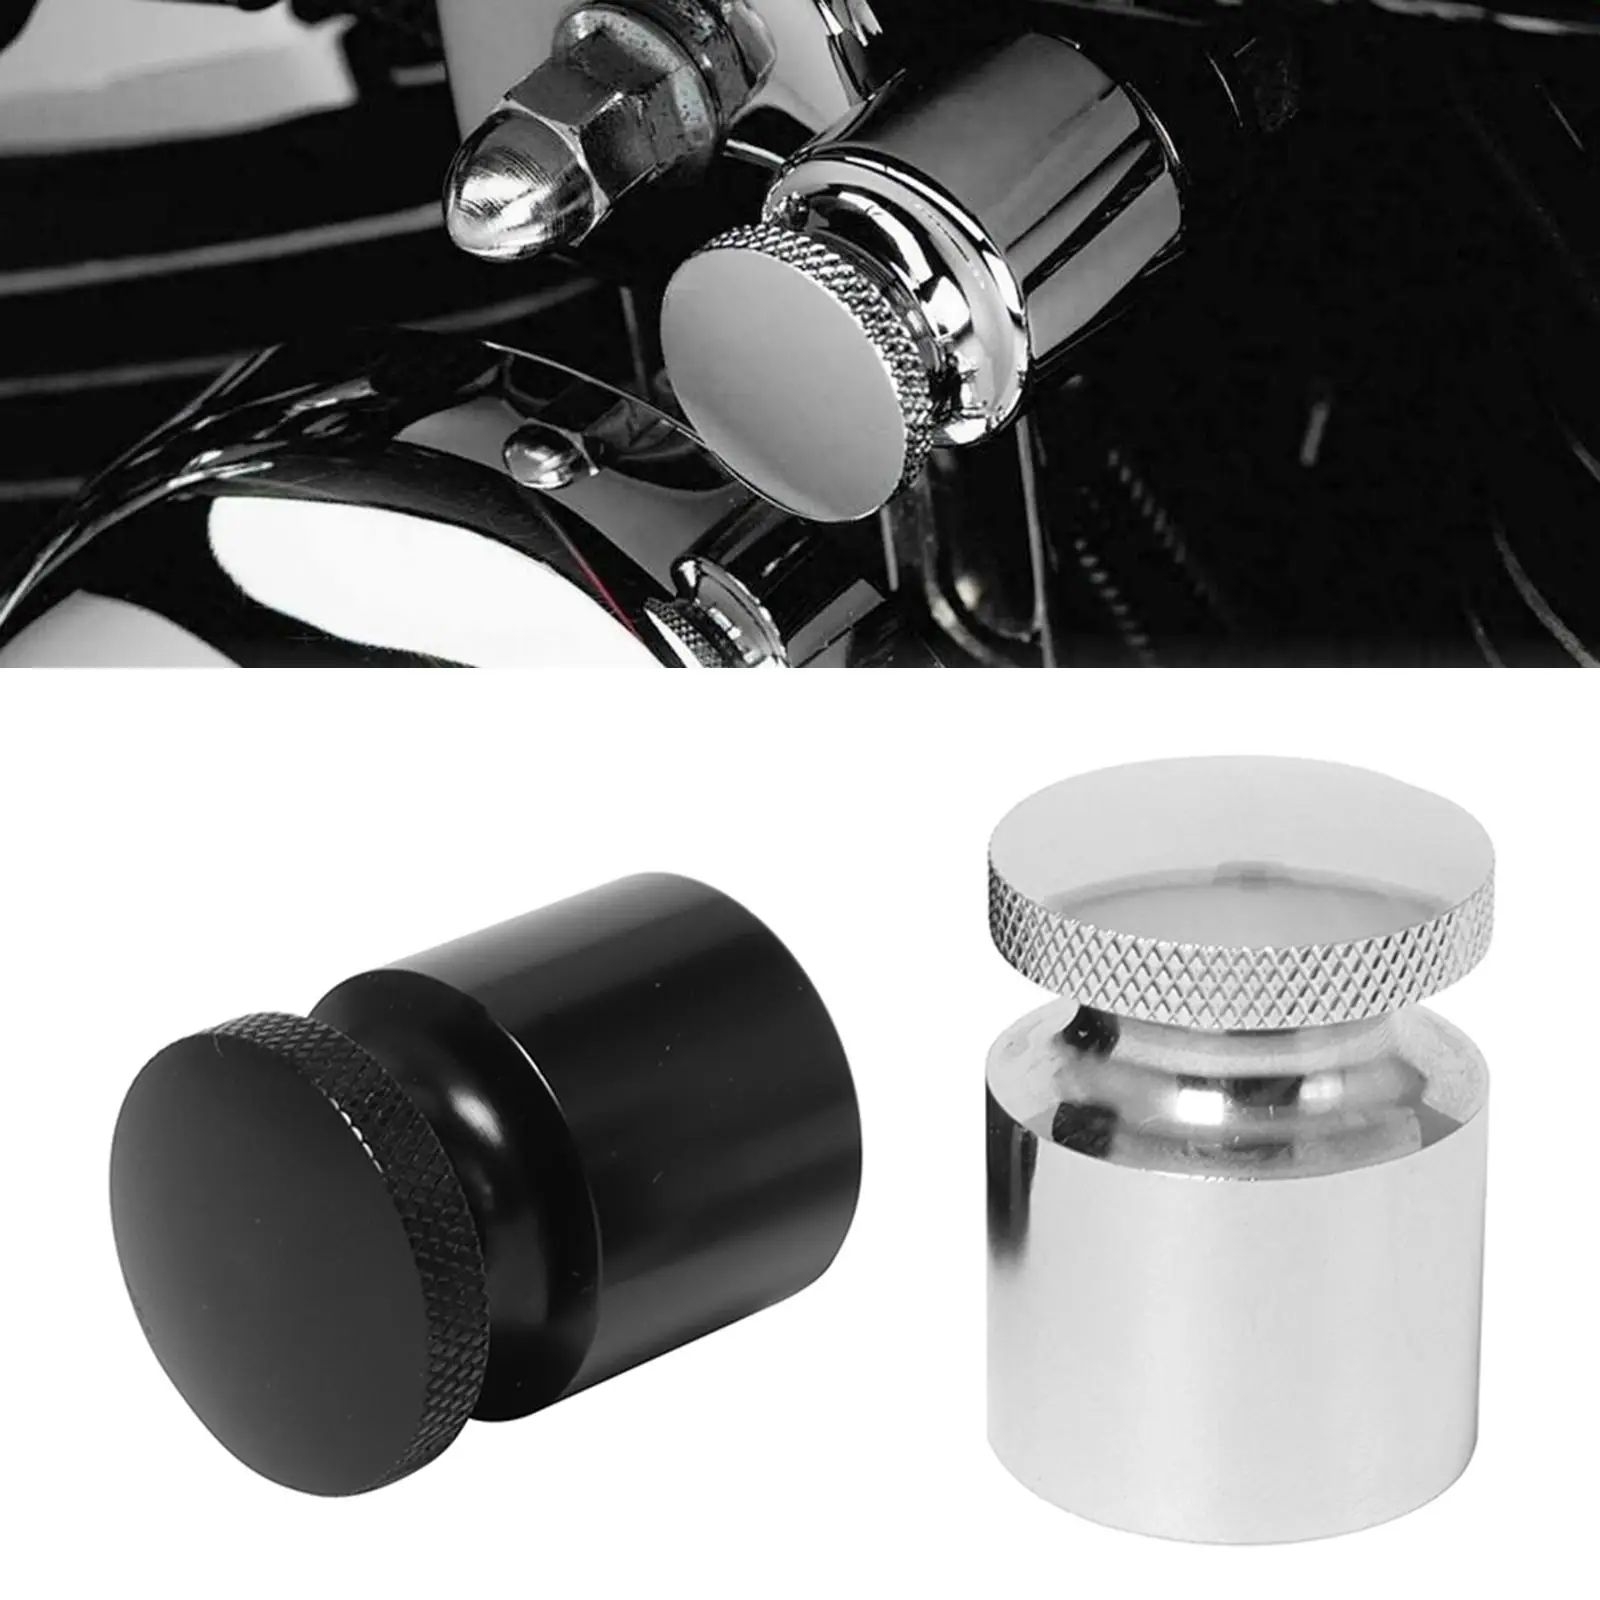 Accessory Choke Knob Cover for    with Threaded Brass Insert Parts Professional Easy to Install 1x